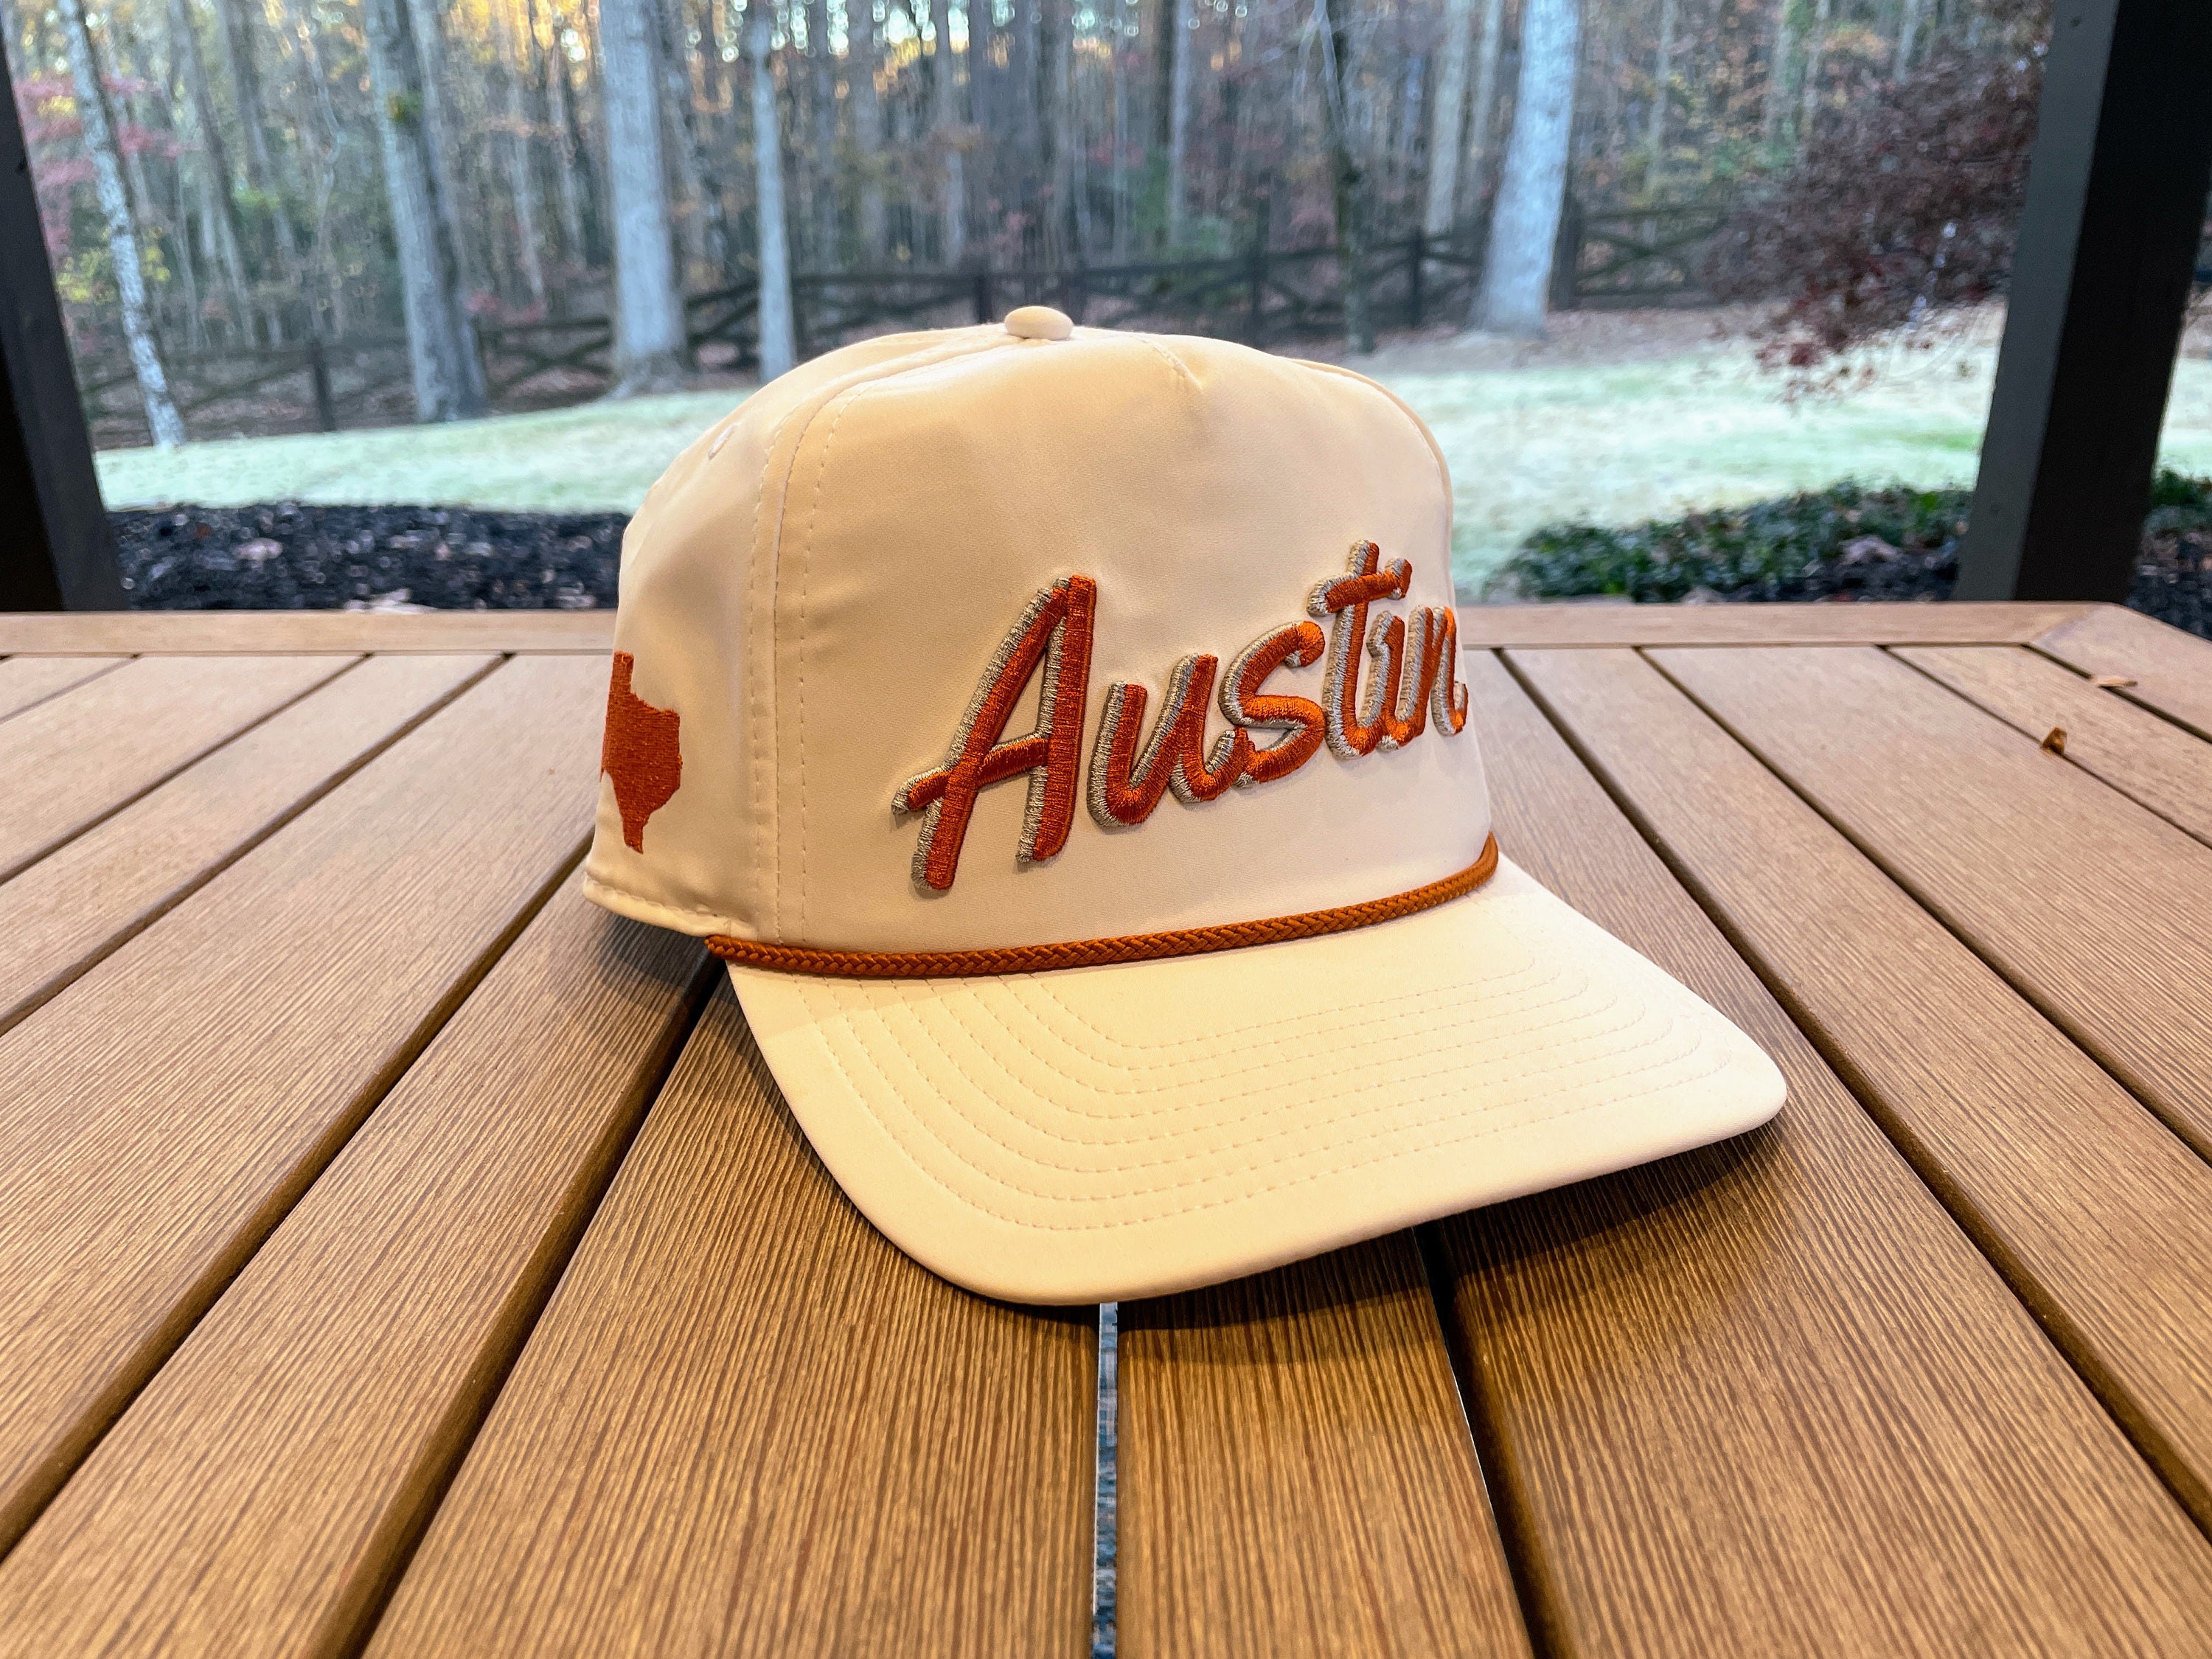 White austin, Tx Rope Hat 3D Embroidery College Football Rope Golf